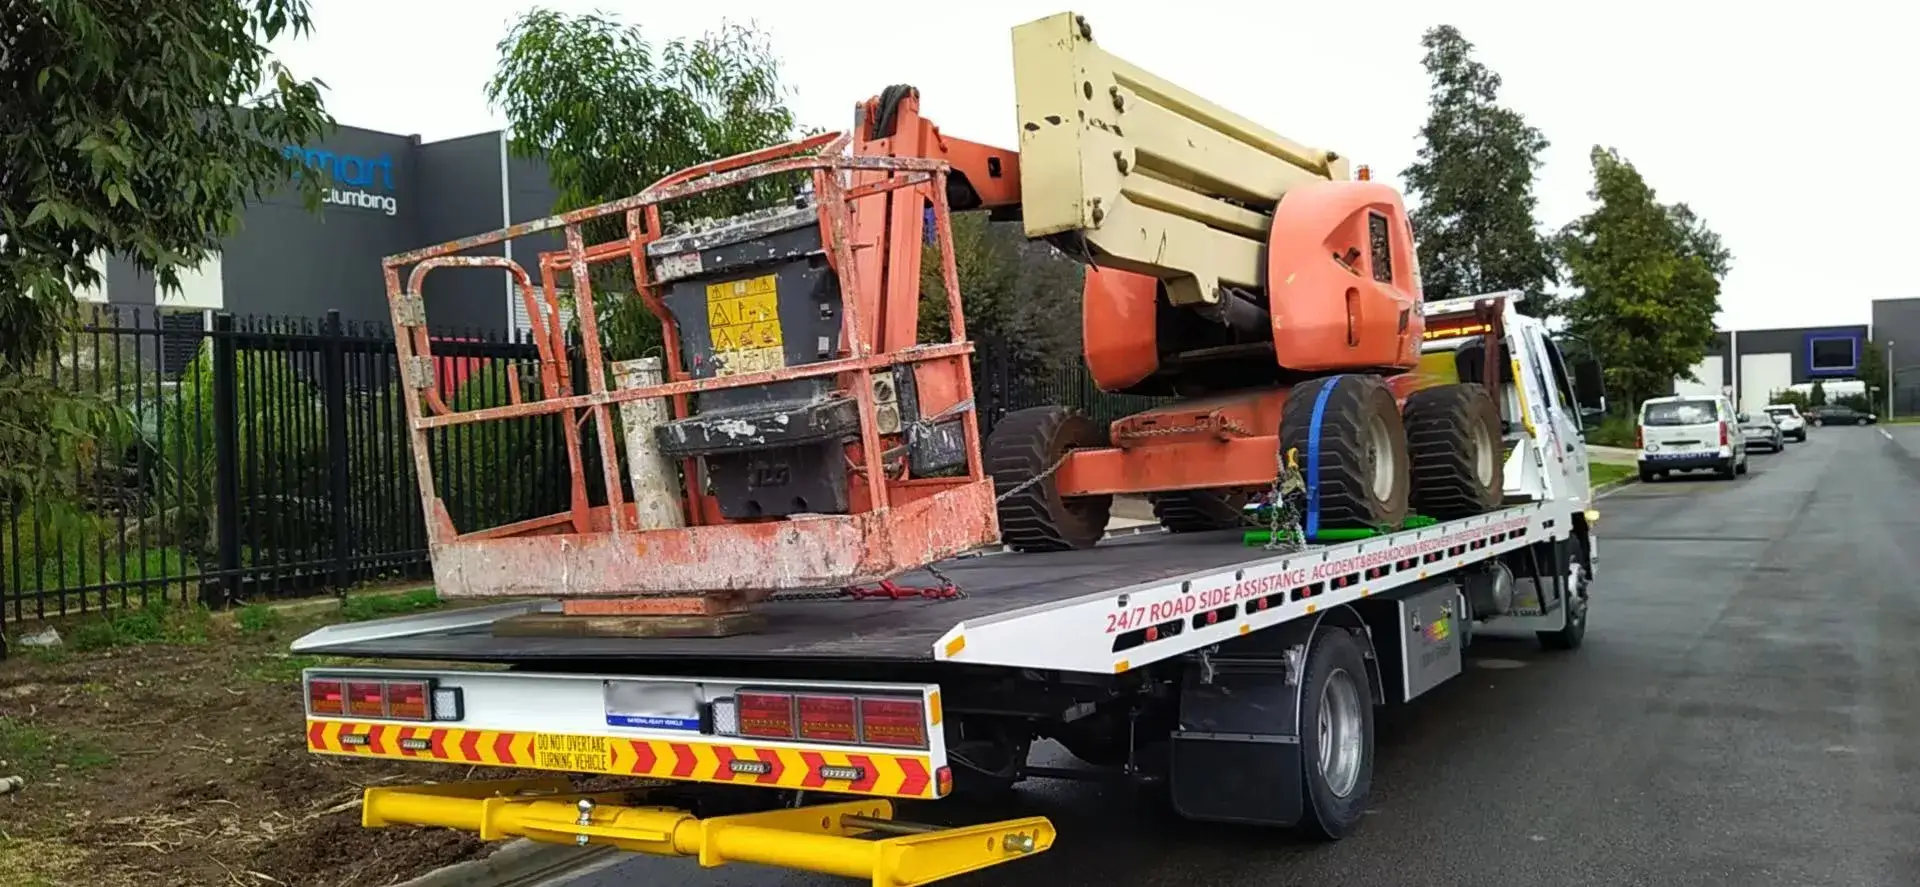 need towing service for your heavy machine? call maningham towing now